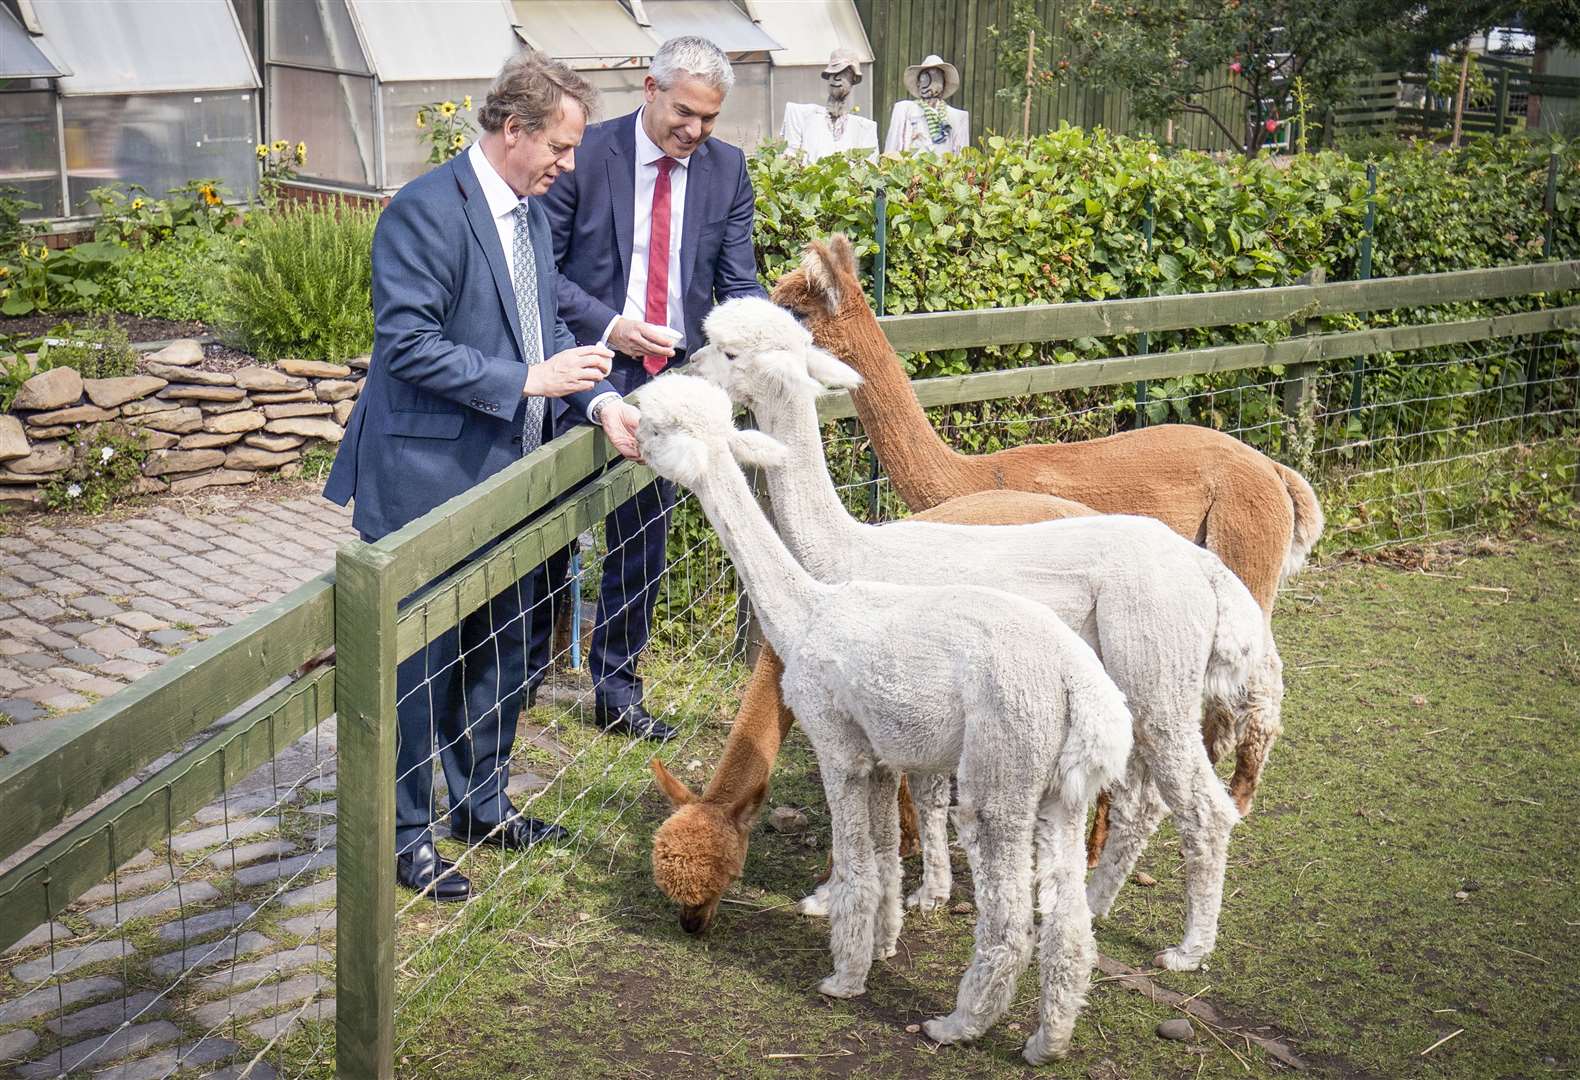 Mr Barclay went to a farm during a visit to Edinburgh last month (Jane Barlow/PA)